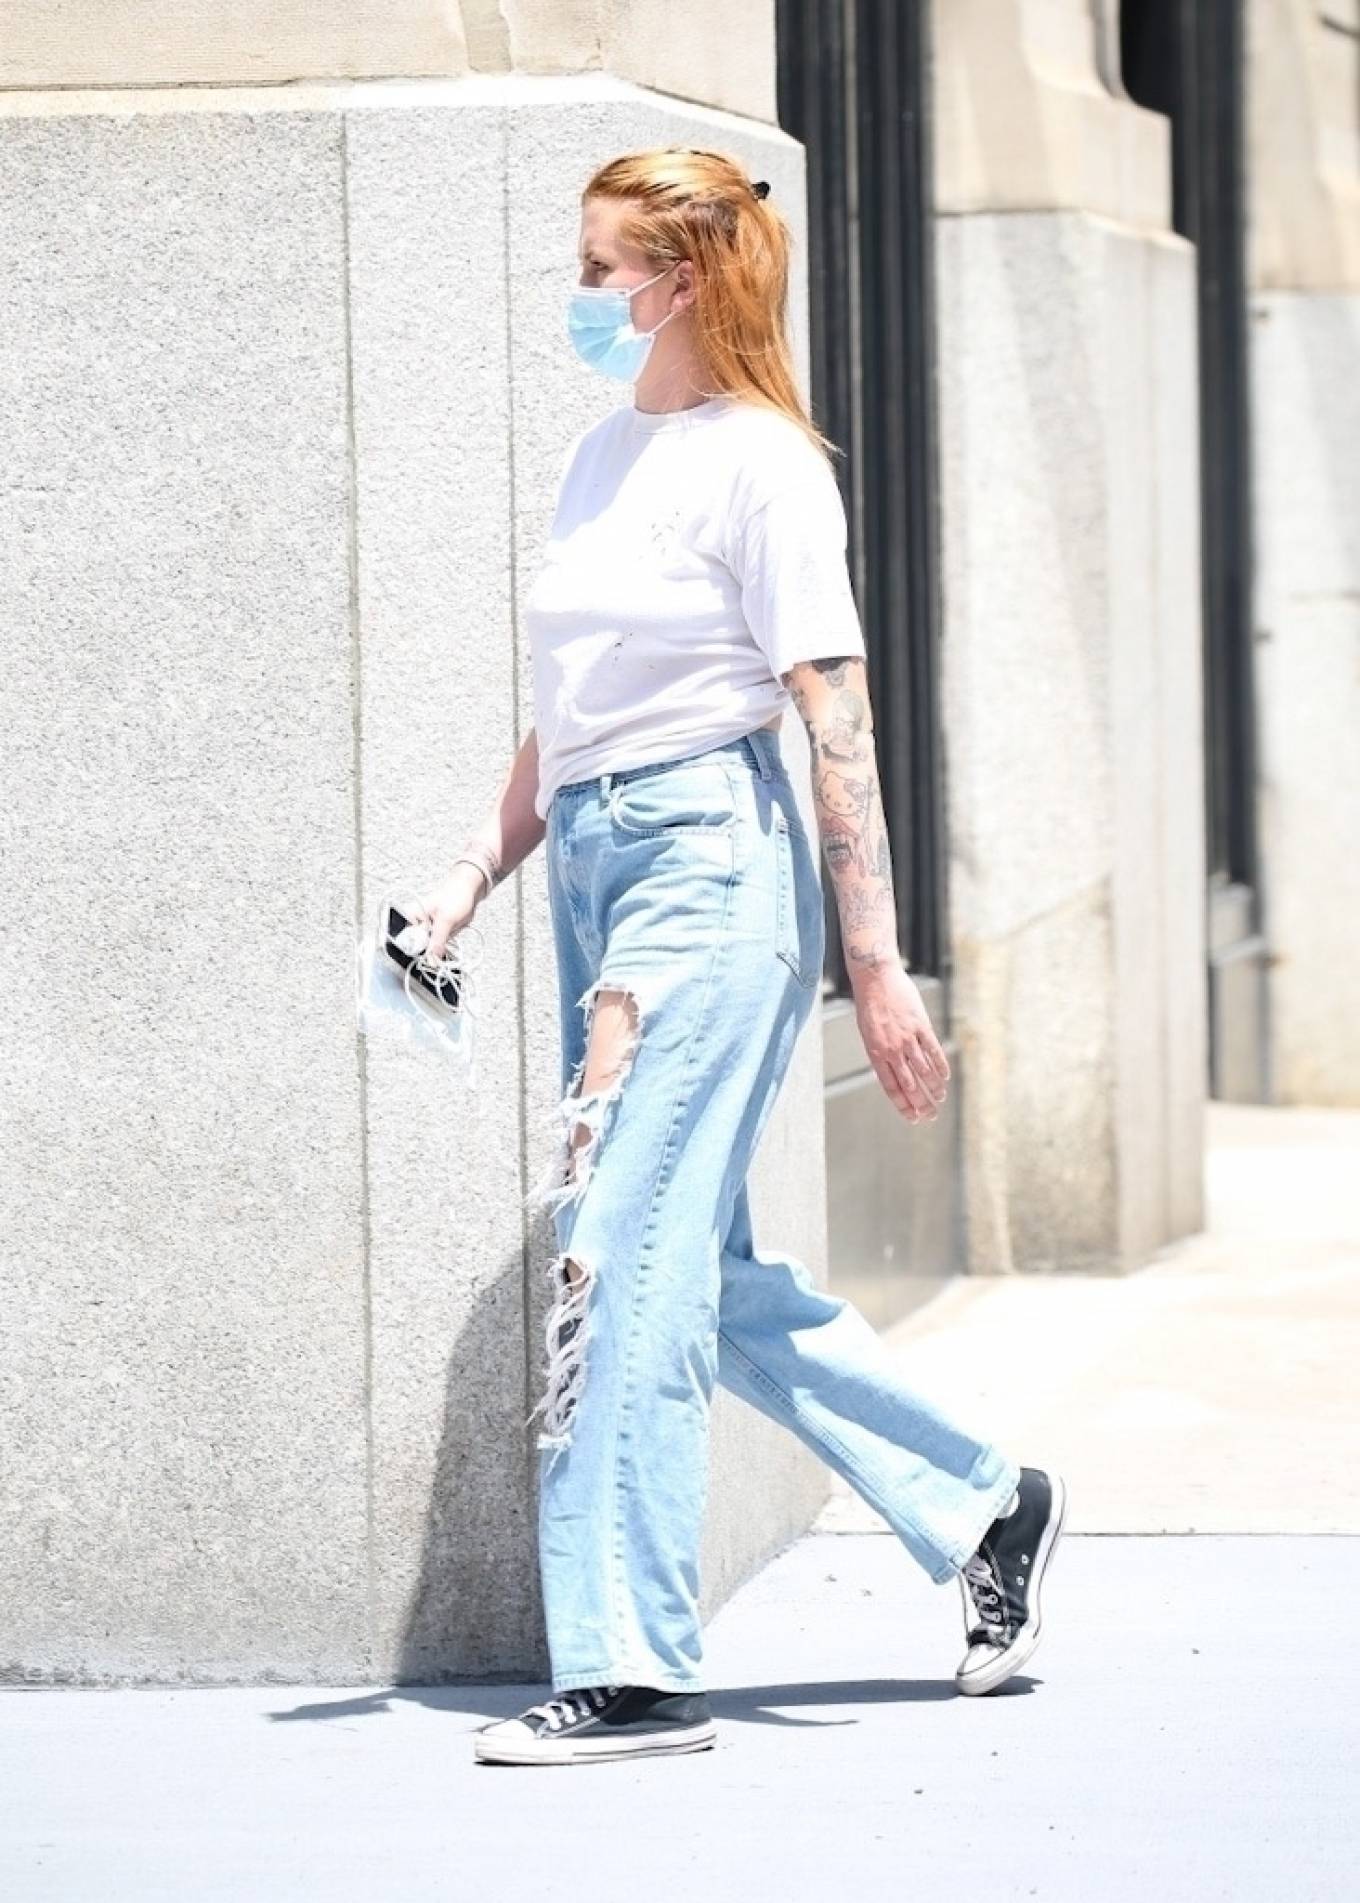 Ireland Baldwin 2021 : Ireland Baldwin – In ripped denim is spotted out and about in New York City-07